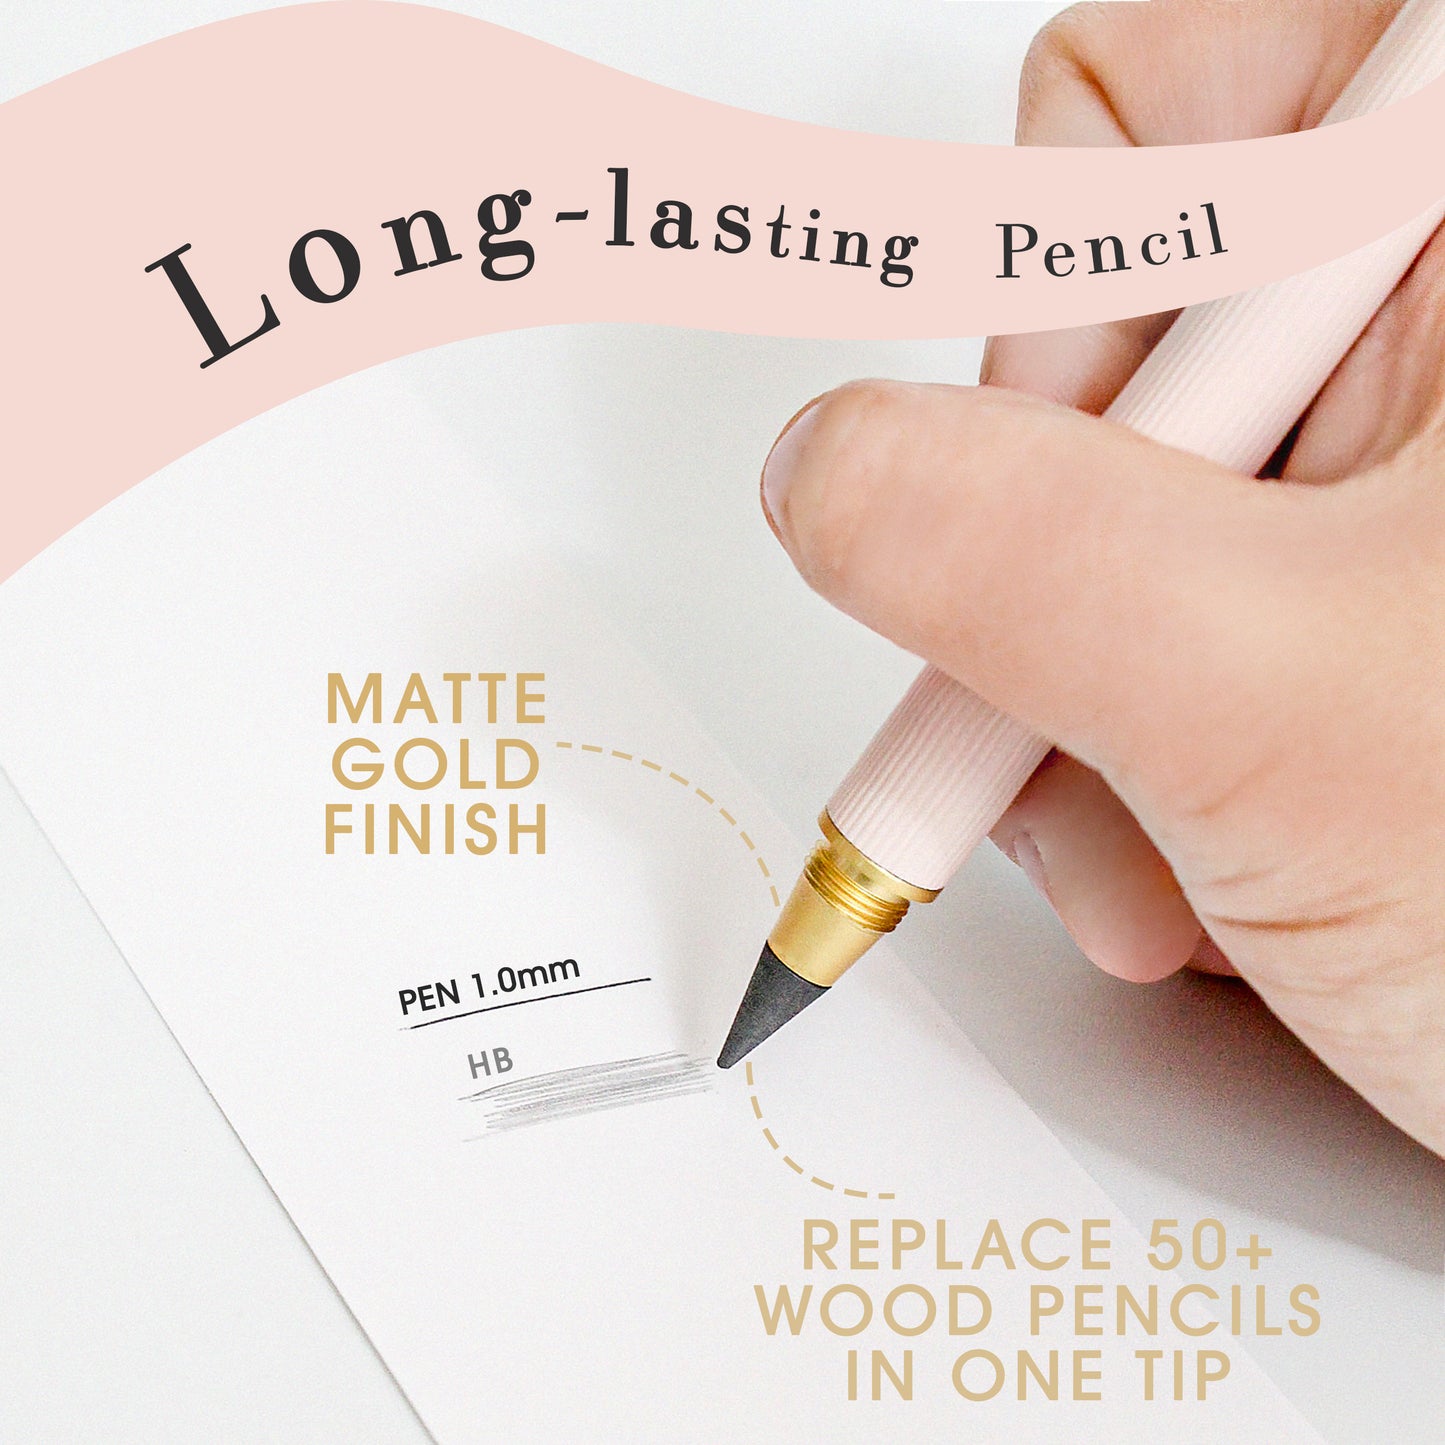 Dual Refillable Pink Ballpoint Pen and Long-Lasting Pencil